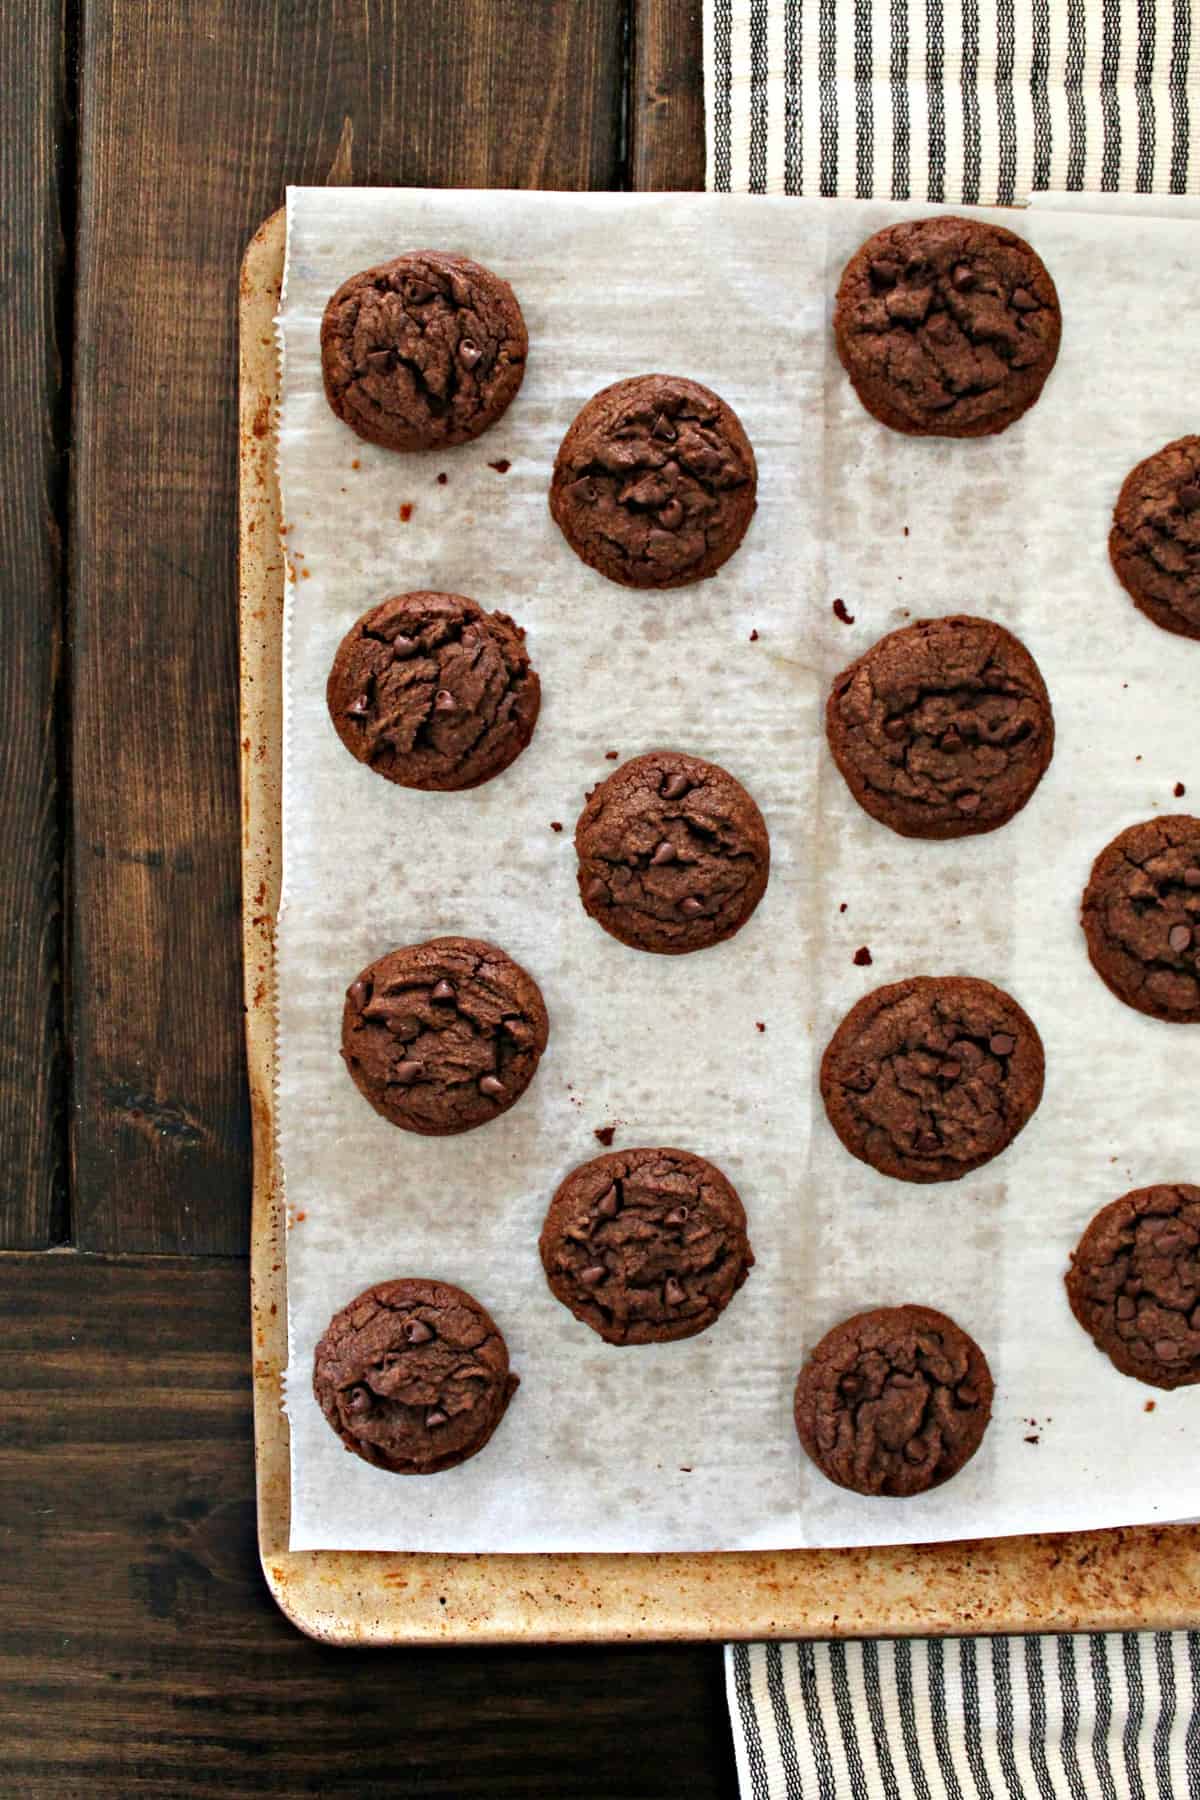 Chocolate Chocolate Chip Cookies! These cookies are a deep, chocolaty, mini-chip-studded version of my favorite chewy chocolate chip cookie recipe! Made with melted butter and requiring no chilling time, they're an easy recipe to whip up for last minute gatherings or any celebration! 